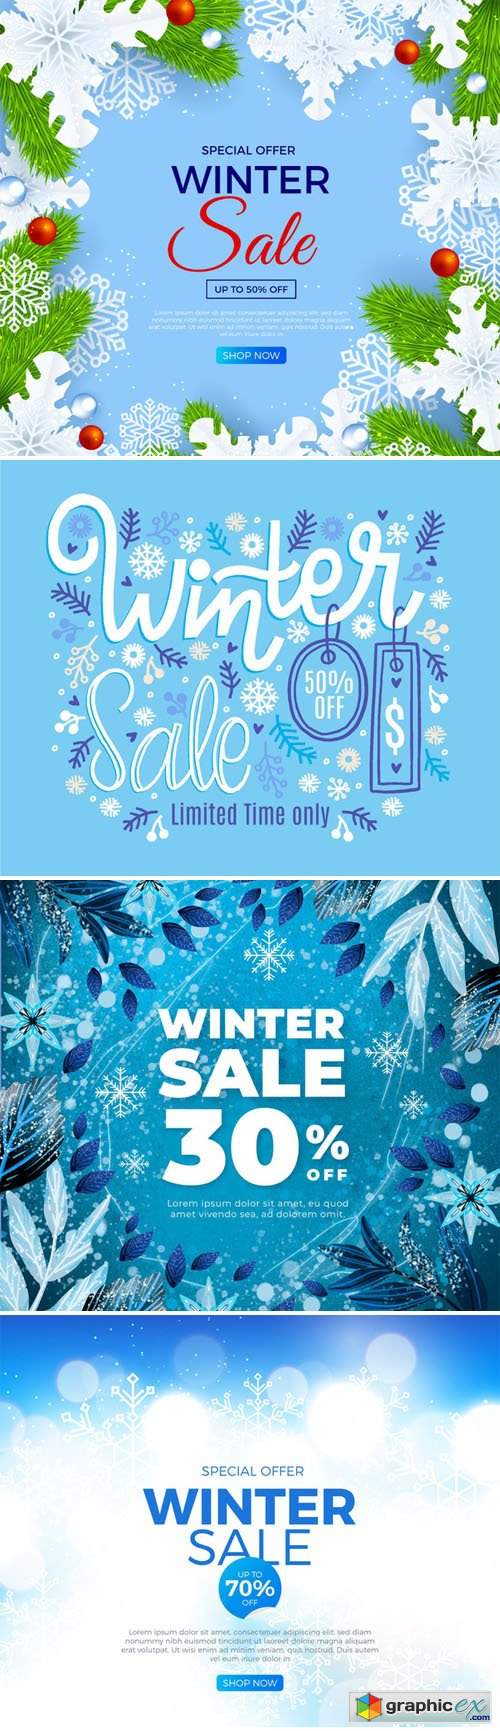  14 Winter Sales Backgrounds With Special Offers Vector Collection 